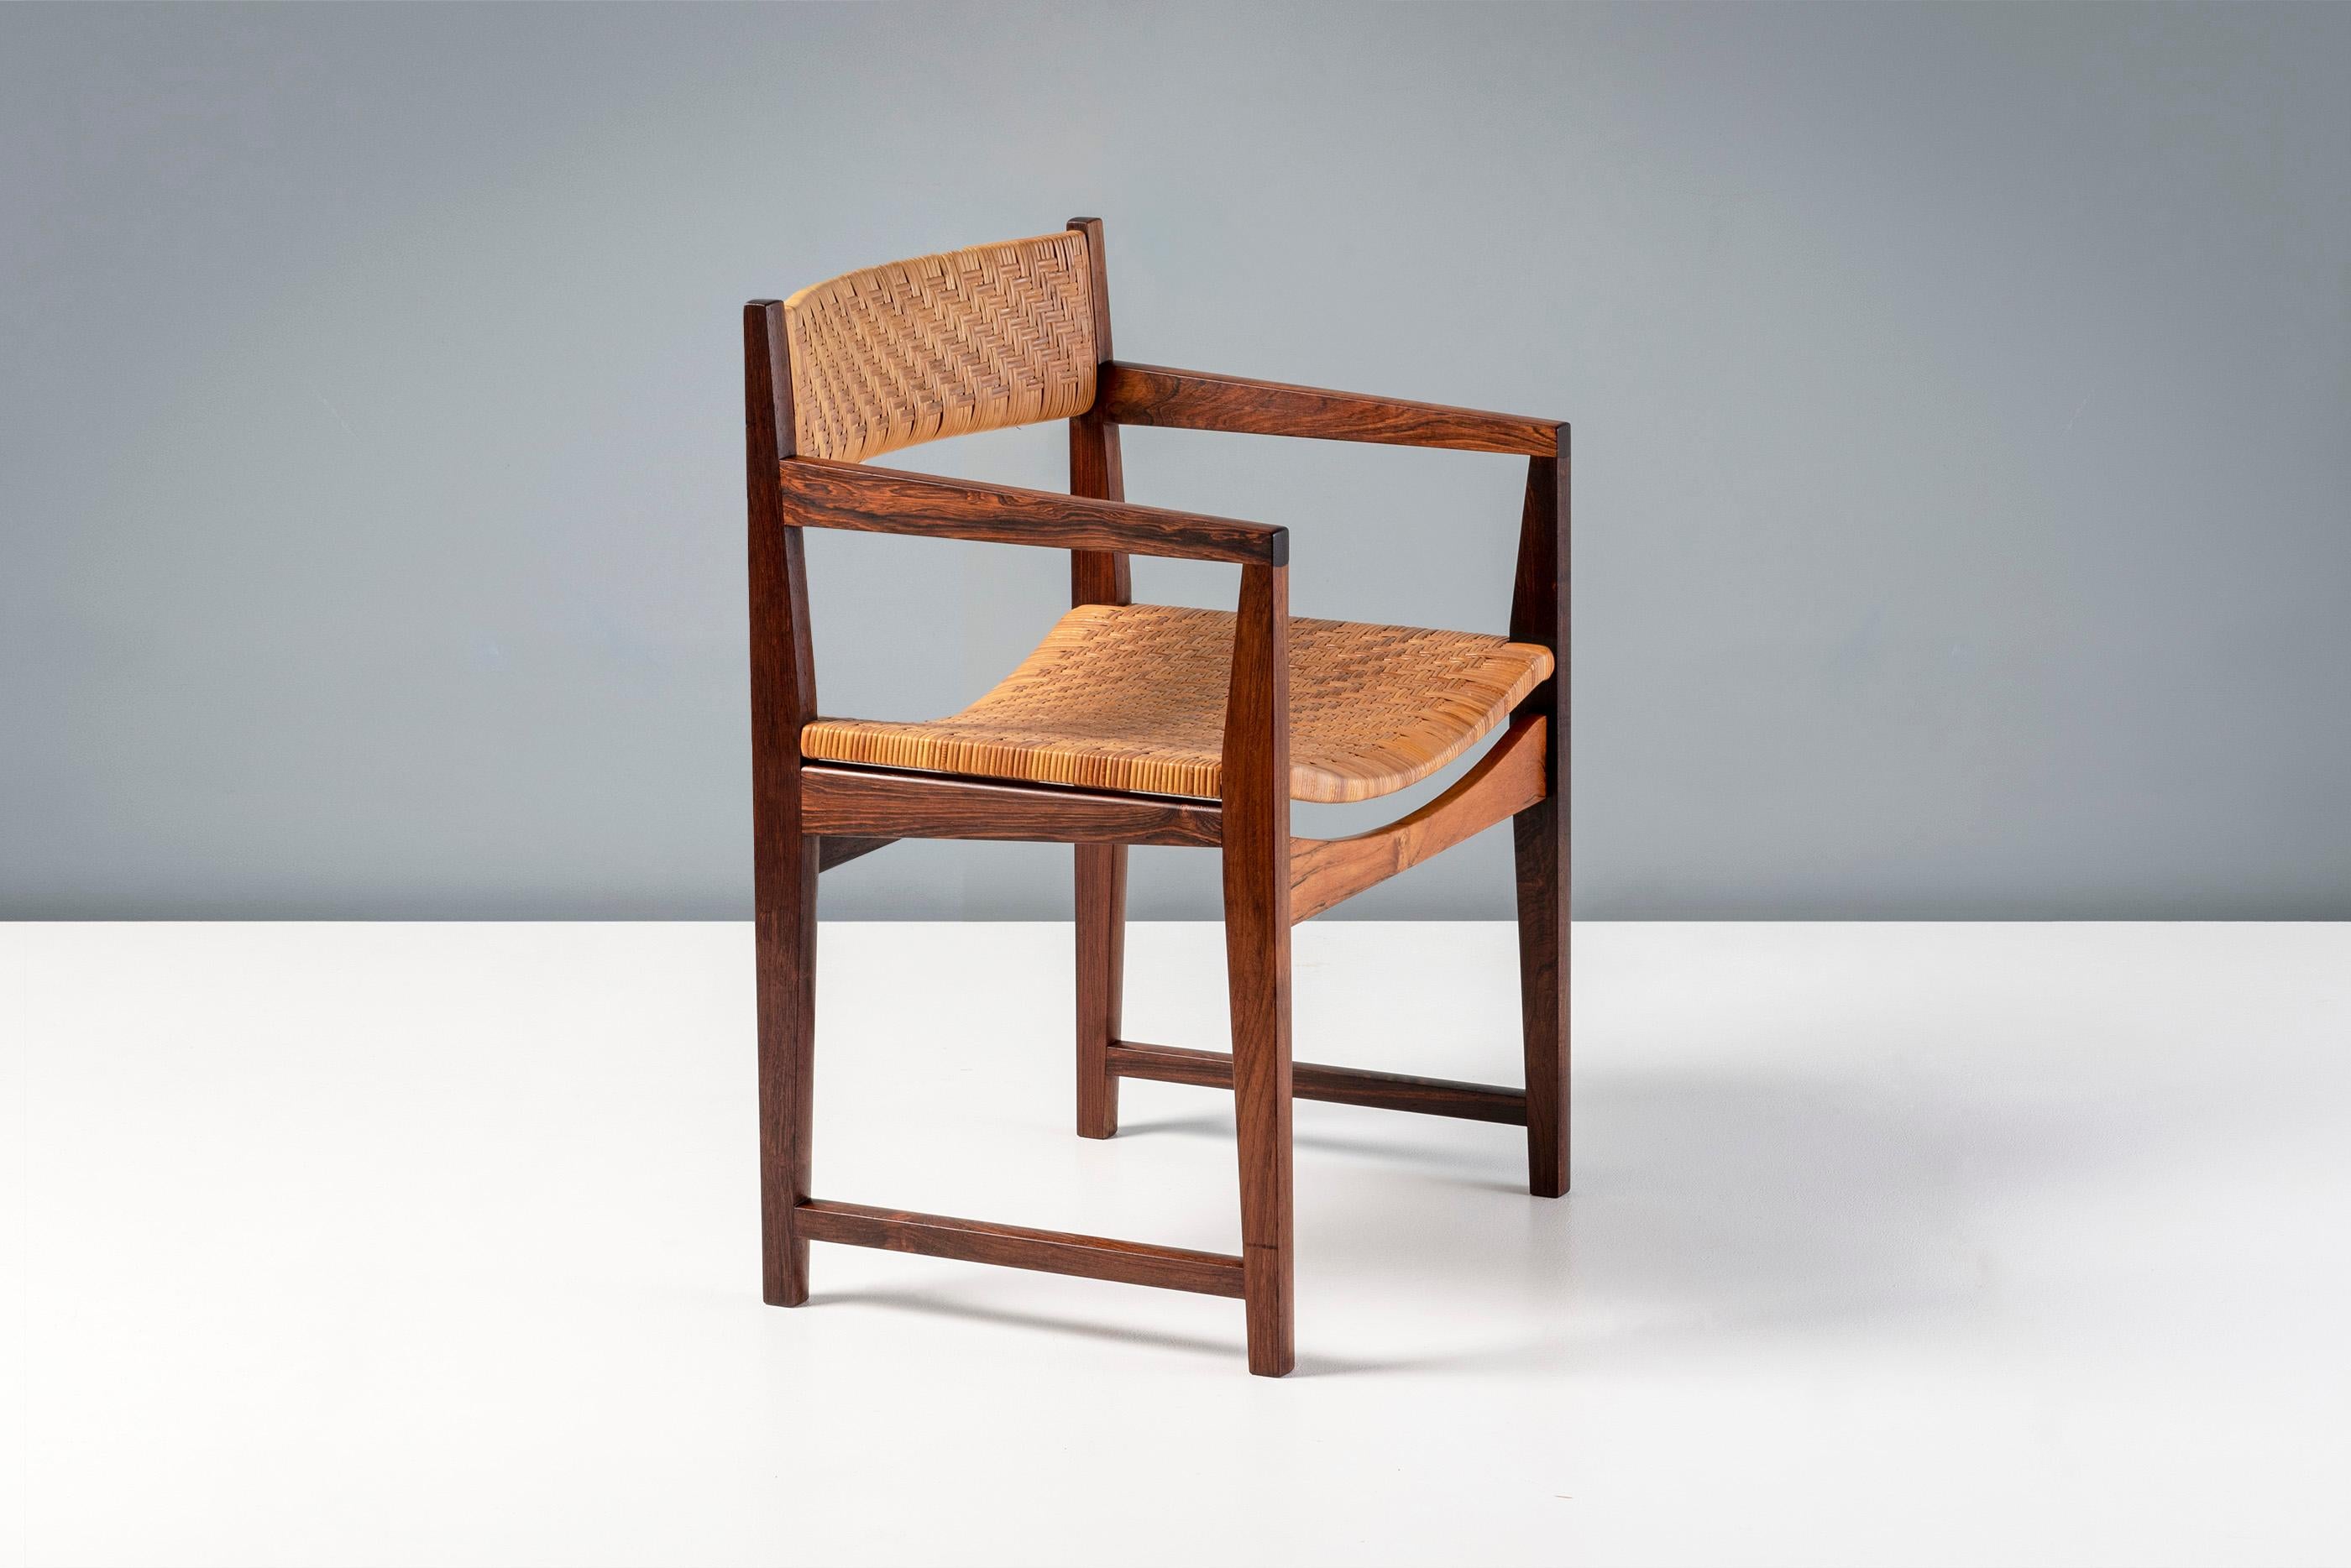 Peter Hvidt - Model 350 Armchair, 1957

Rarely seen rosewood example of this modernist armchair by Peter Hvidt, produced by Søborg Møbler, Denmark. The original rattan cane is in immaculate condition. 

H: 75cm  /  D: 48cm  /  W: 62cm
